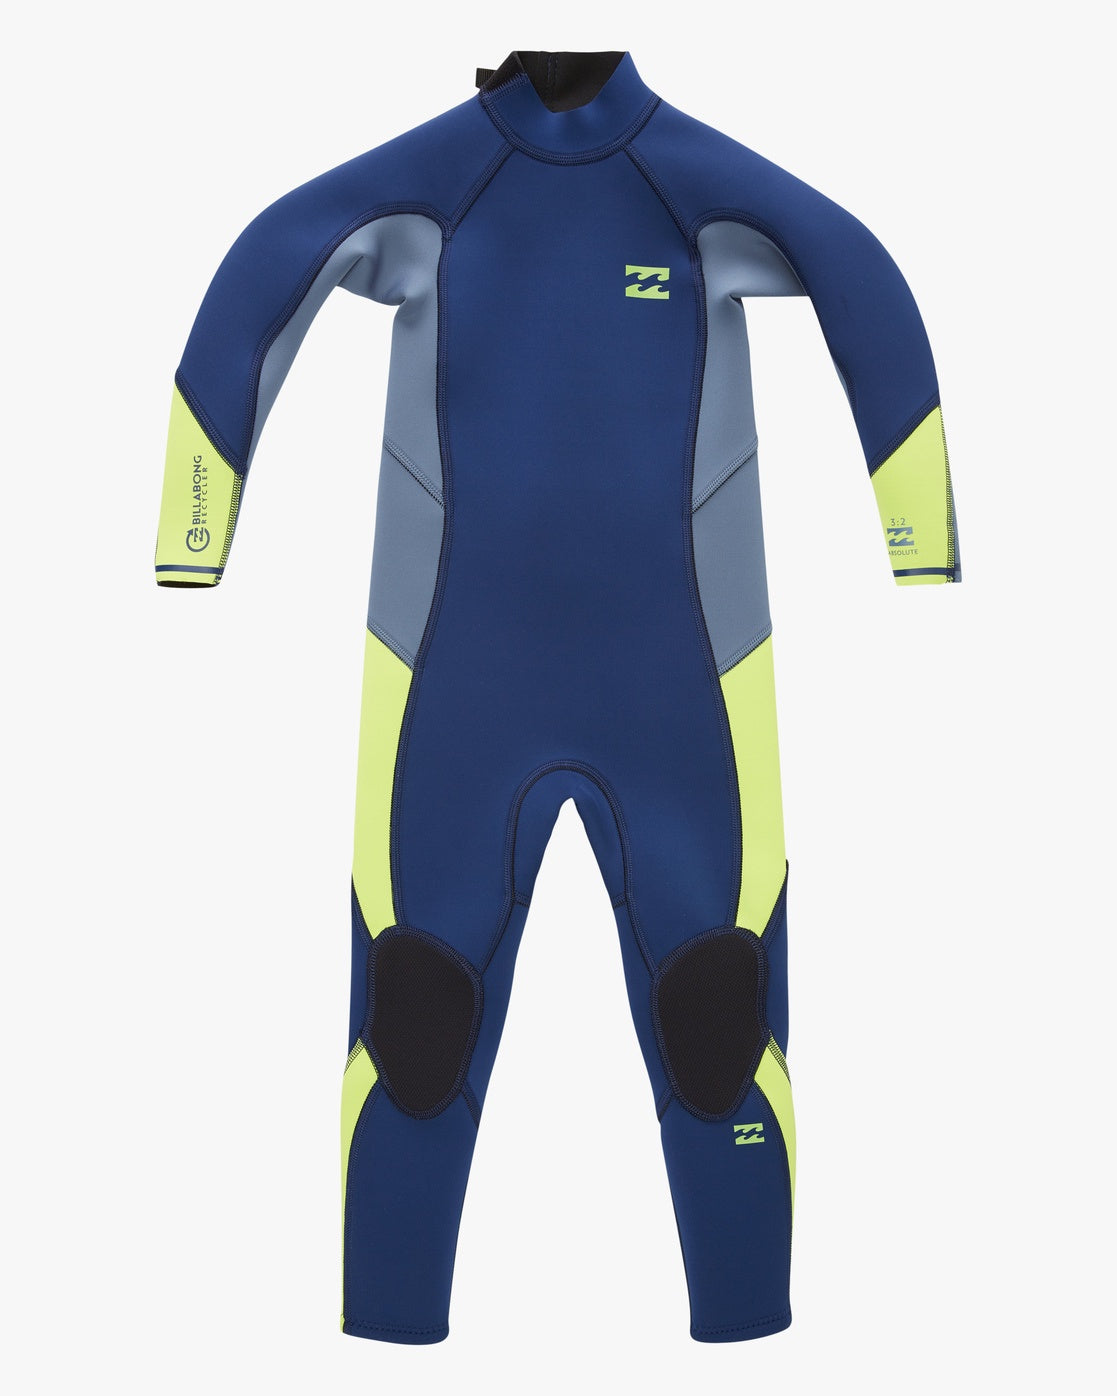 Boys 2-6 3/2 Absolute Steamer Wetsuit